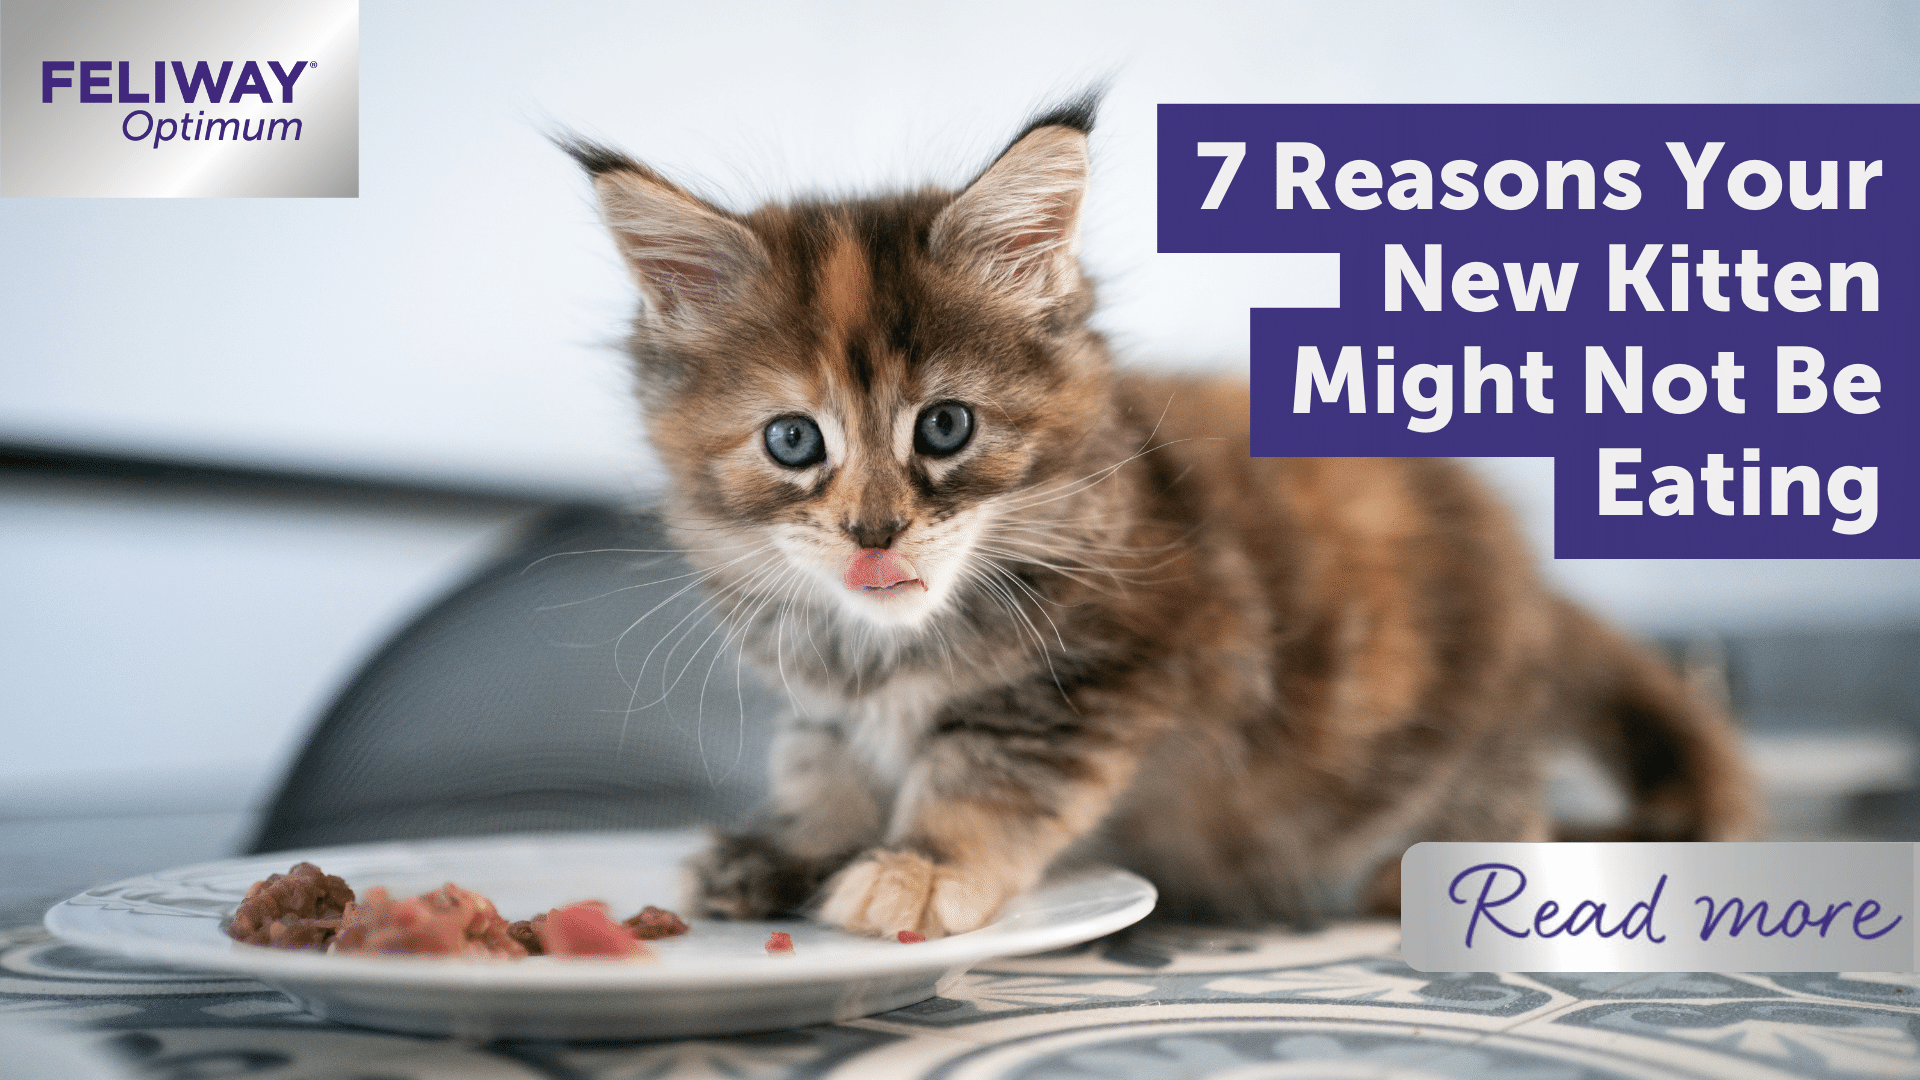 7 Reasons Your New Kitten Might Not Be Eating